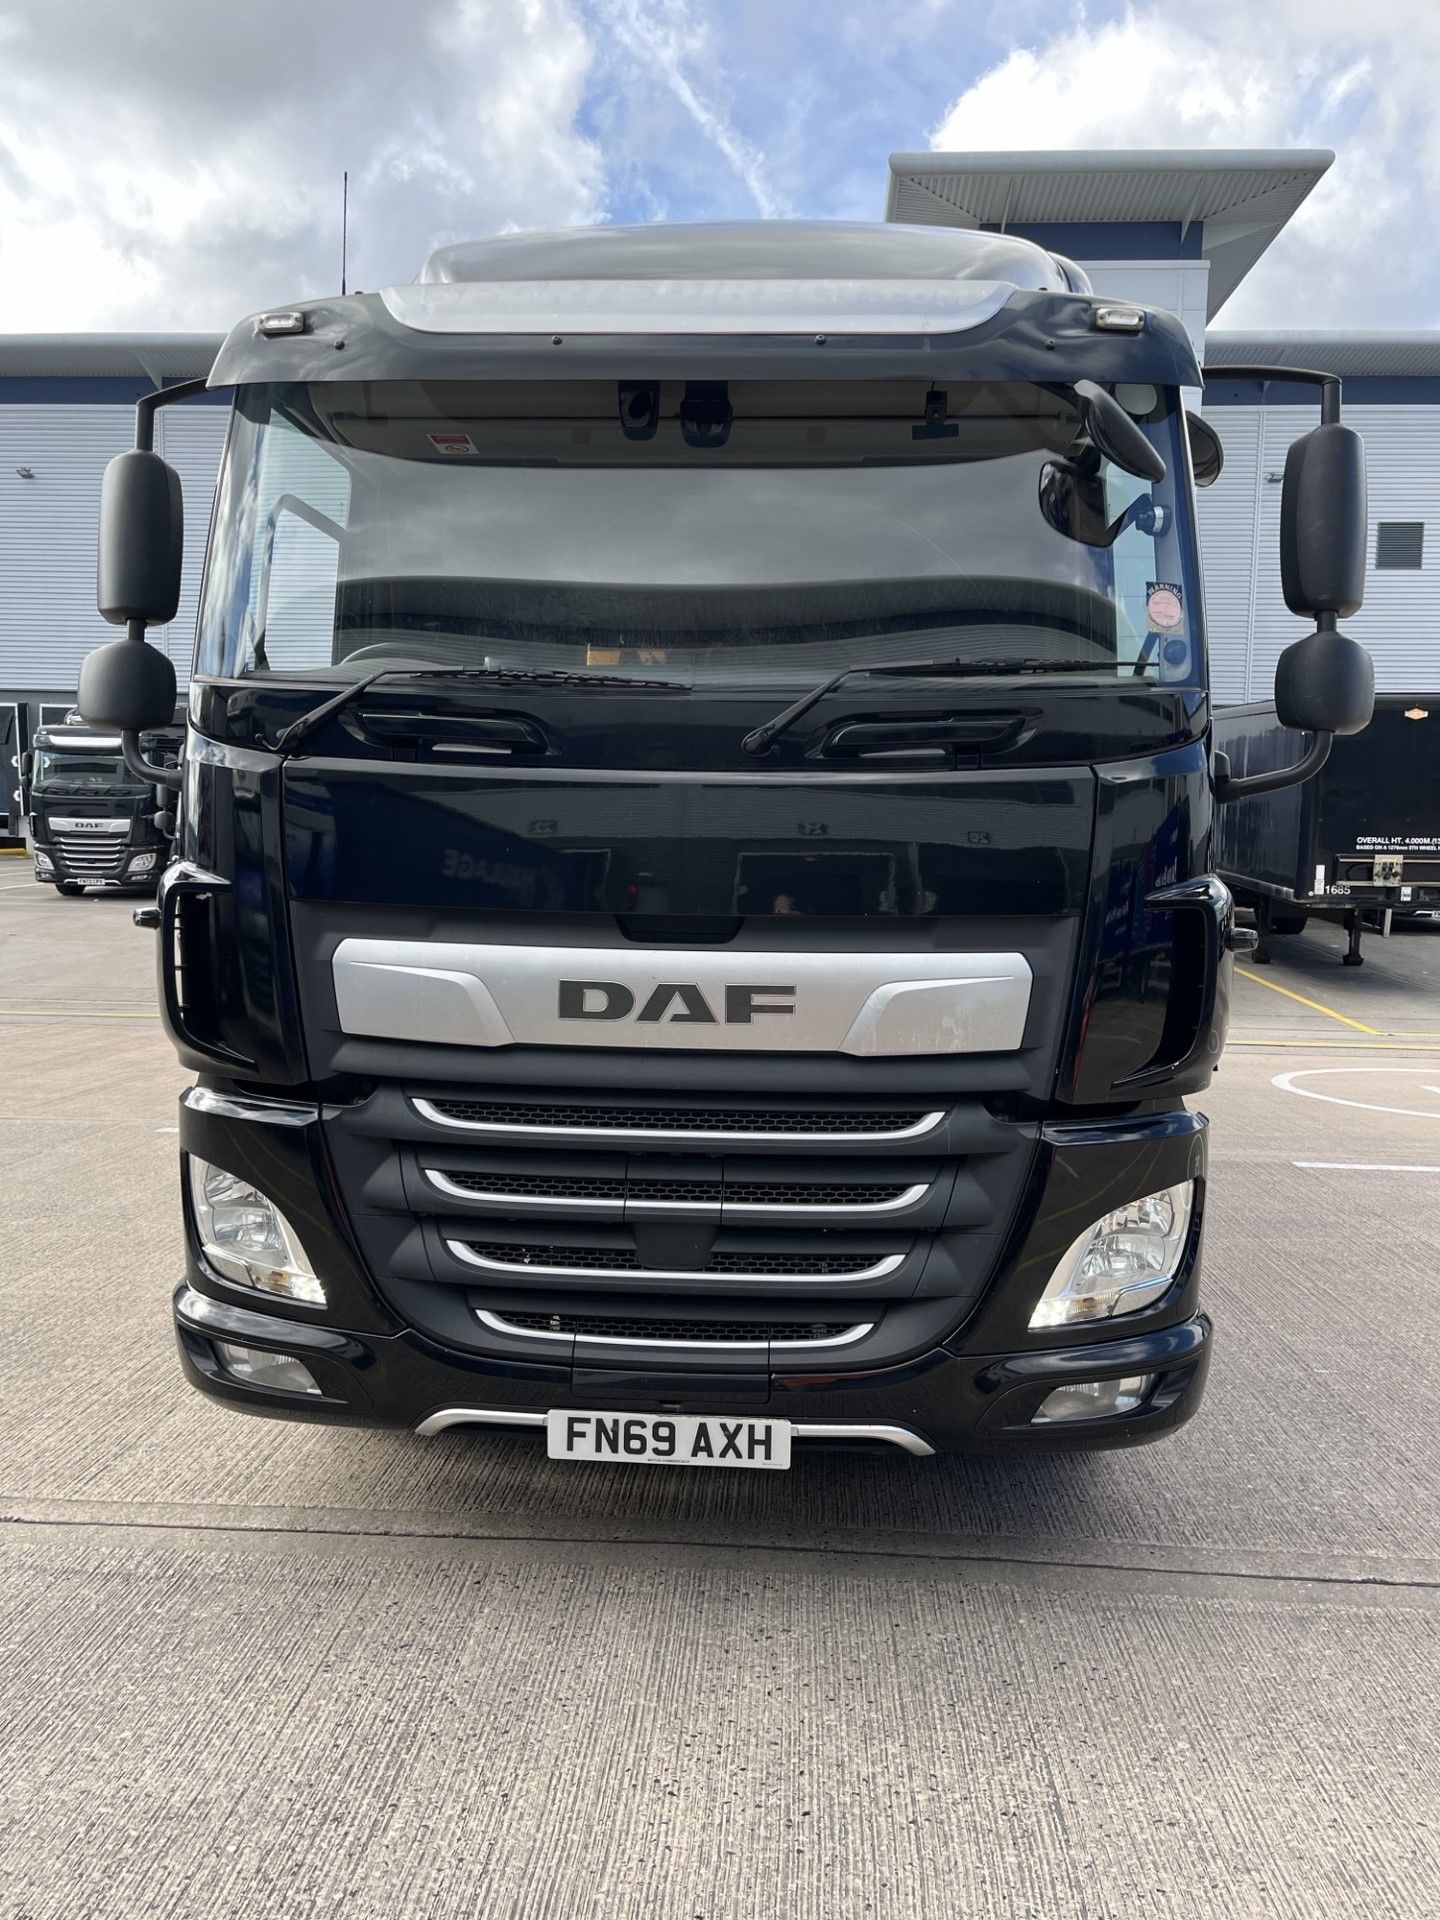 2019, DAF CF 260 FA (Ex-Fleet Owned & Maintained) - FN69 AXH (18 Ton Rigid Truck with Tail Lift) - Image 2 of 14